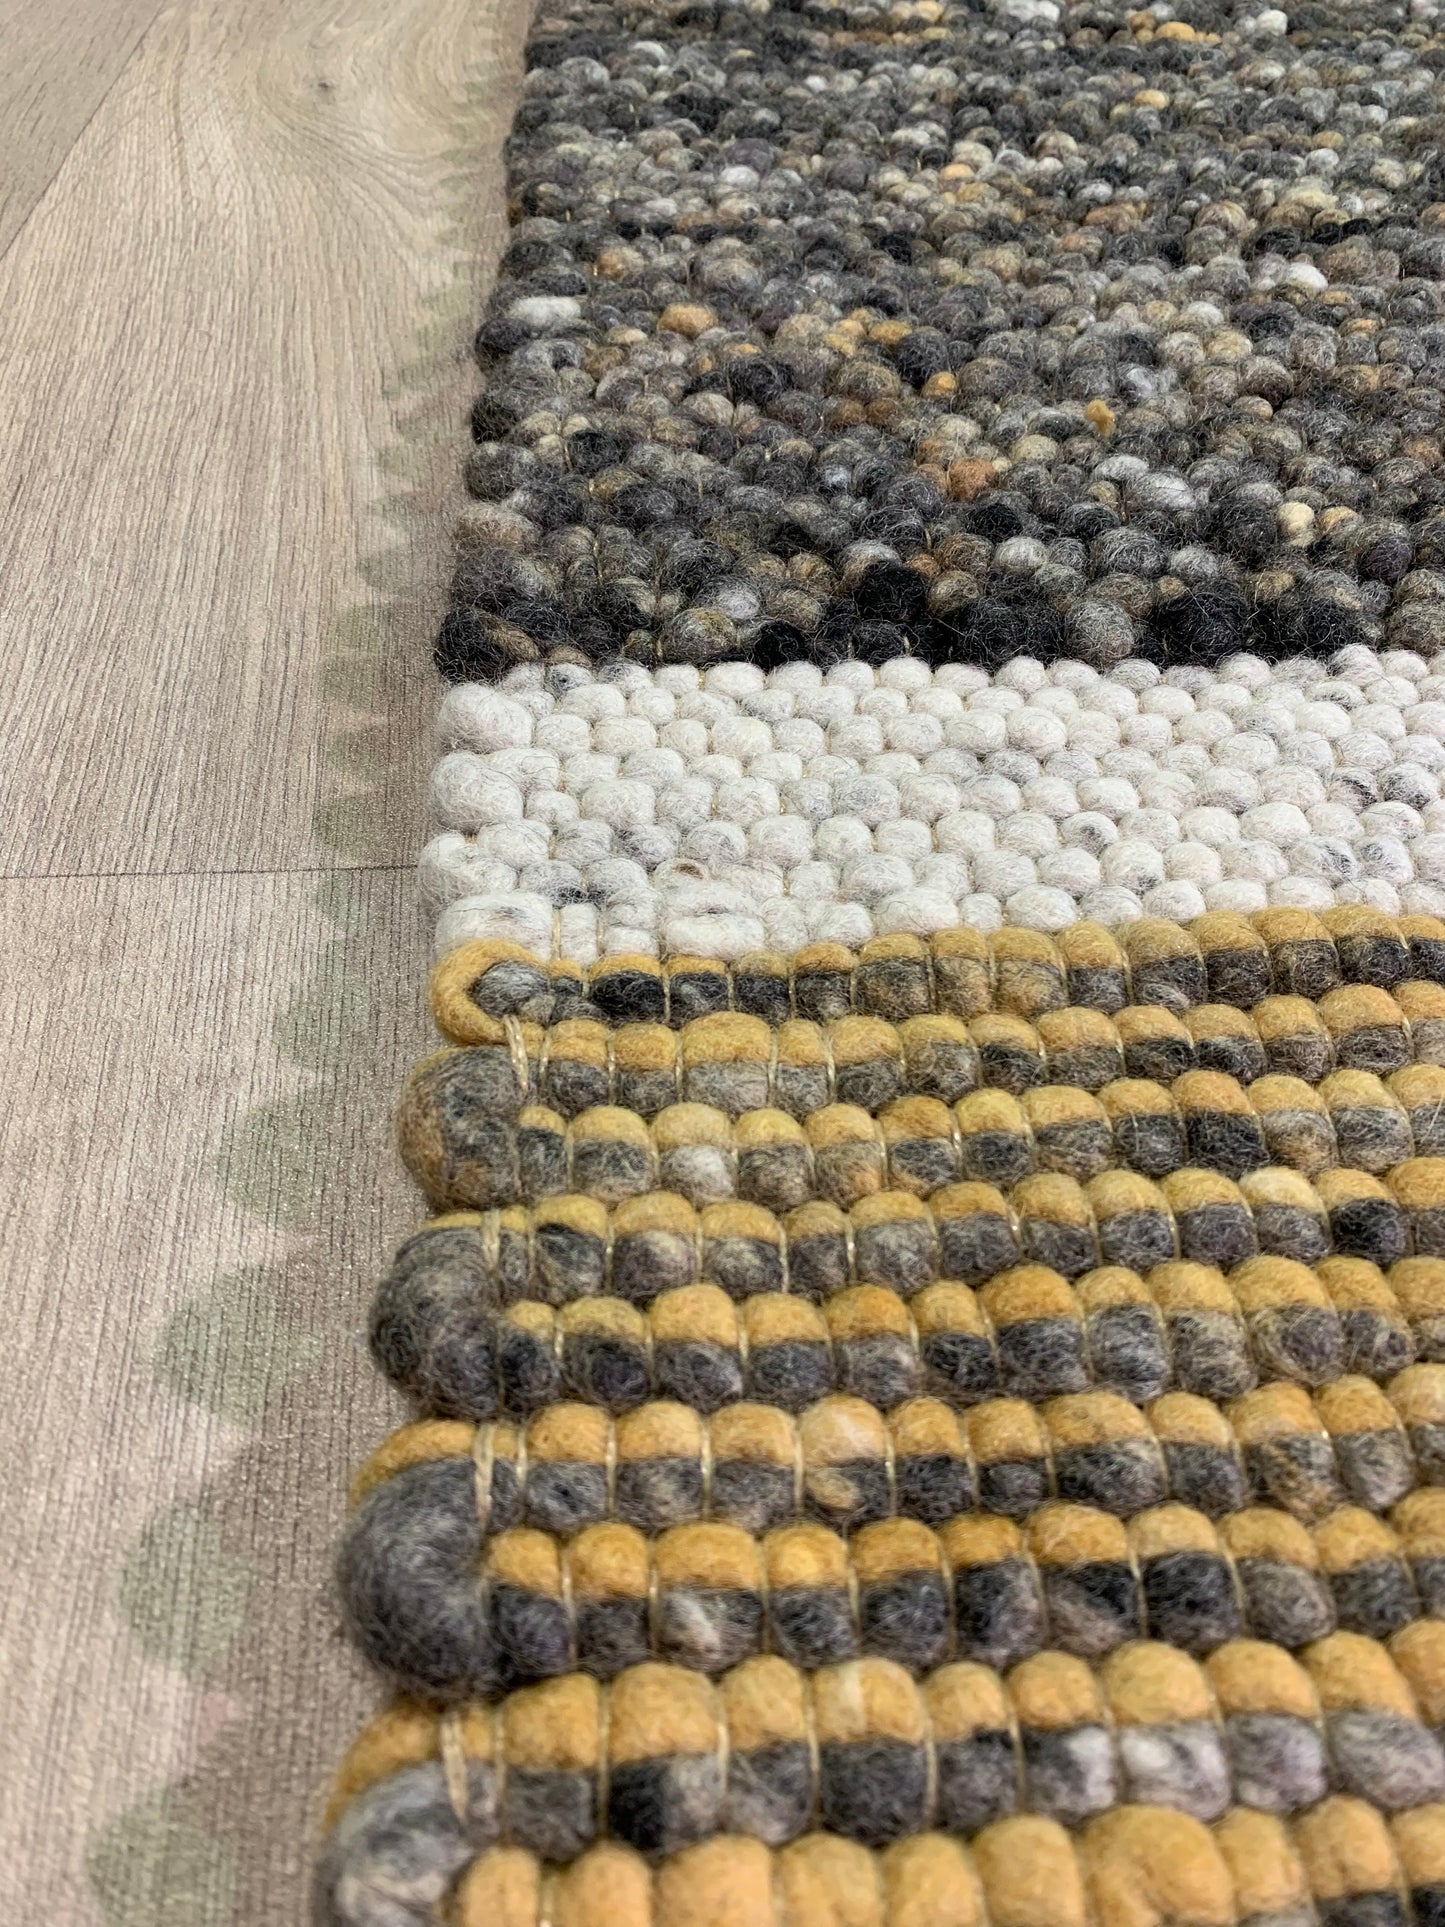 Salsa-W: High Range wool rug - hand knotted / Customizable colors